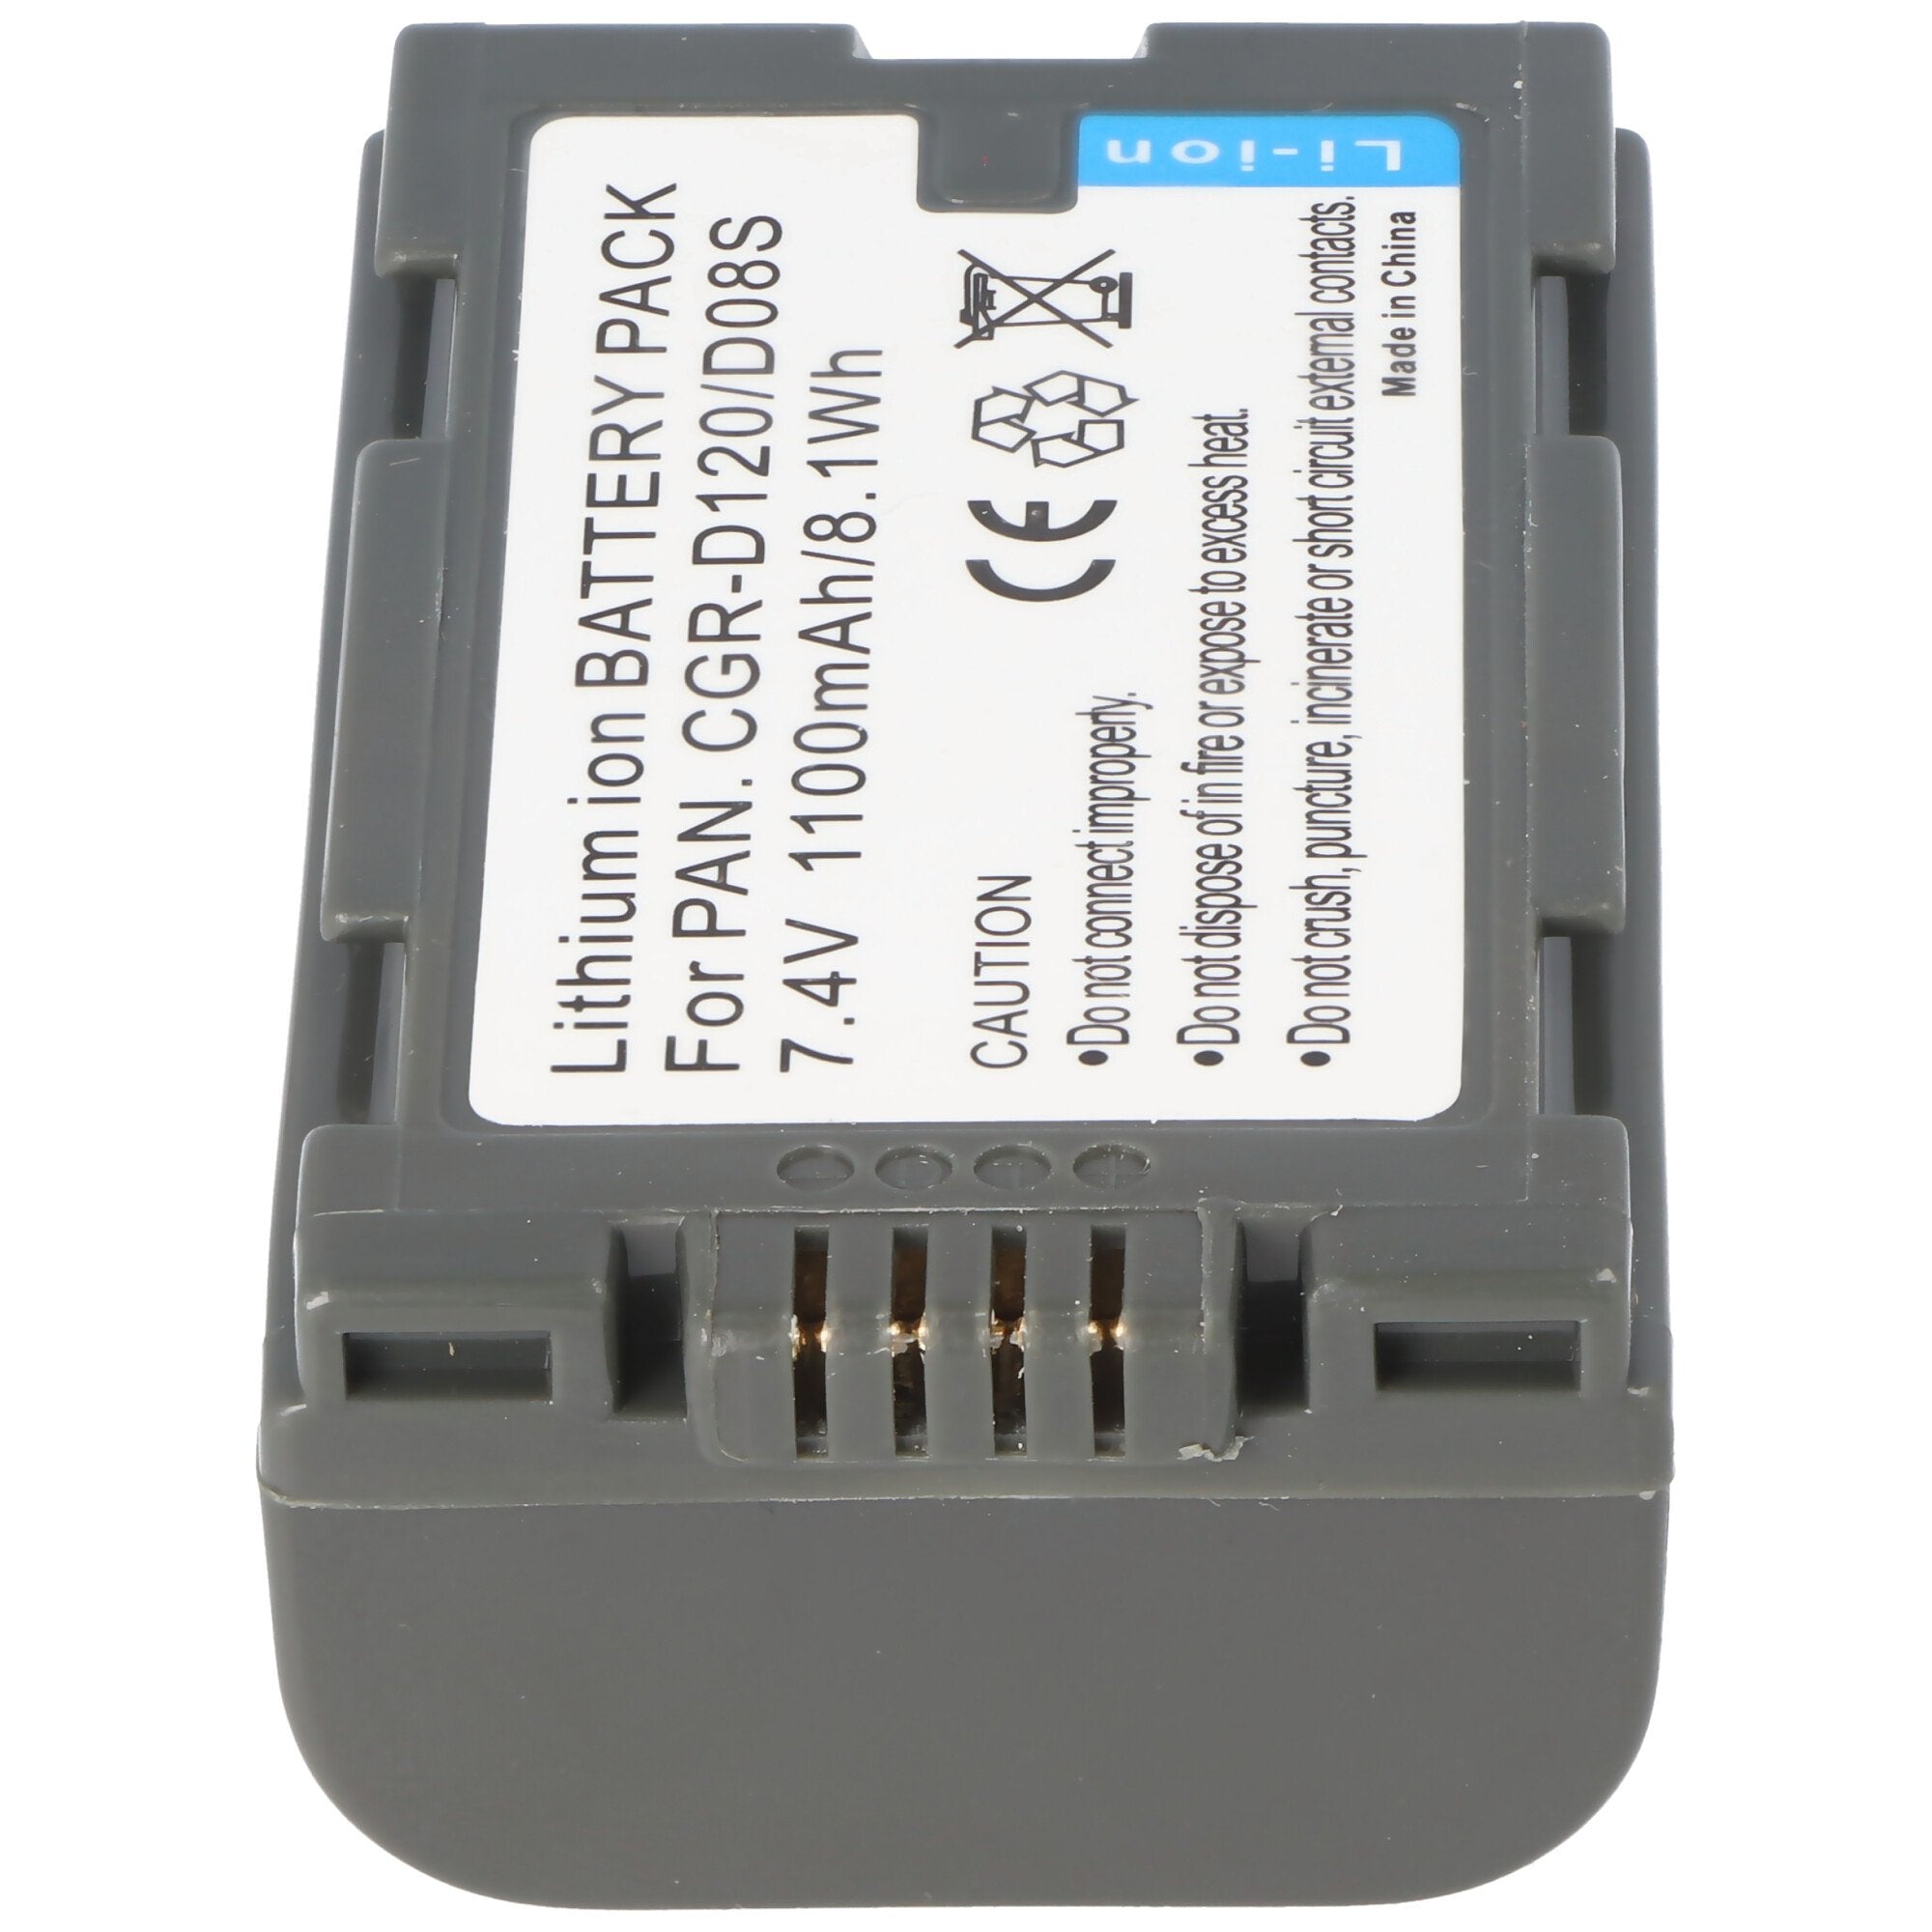 AccuCell battery suitable for Panasonic CGR-D120, CGR-D08, CGP-D14